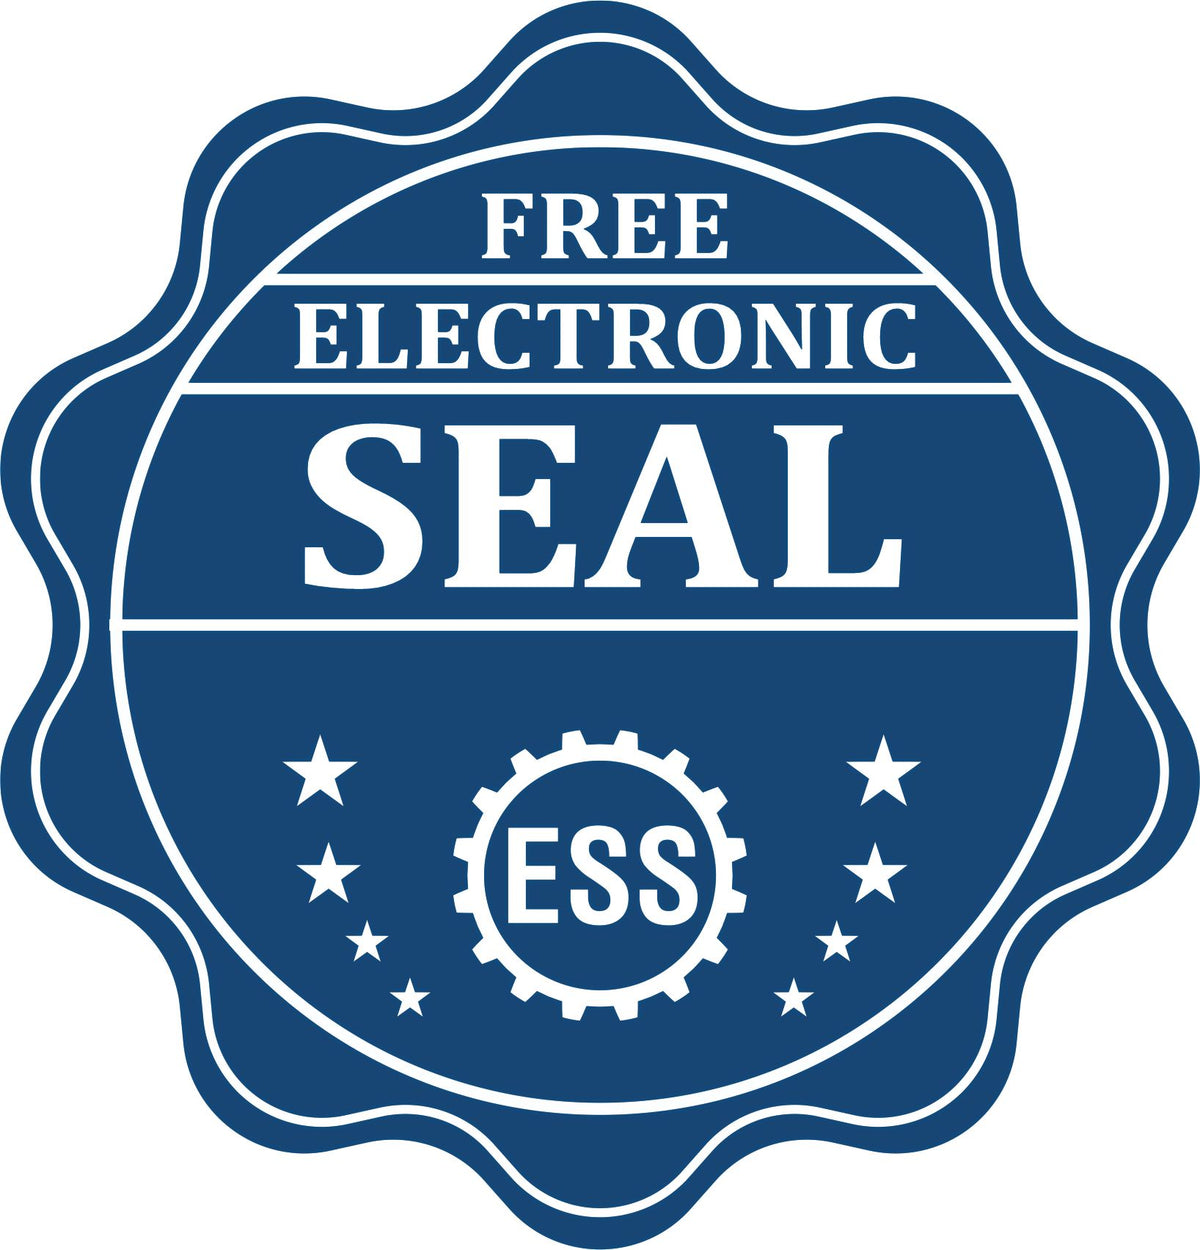 A badge showing a free electronic seal for the Heavy Duty Cast Iron Oregon Geologist Seal Embosser with stars and the ESS gear on the emblem.